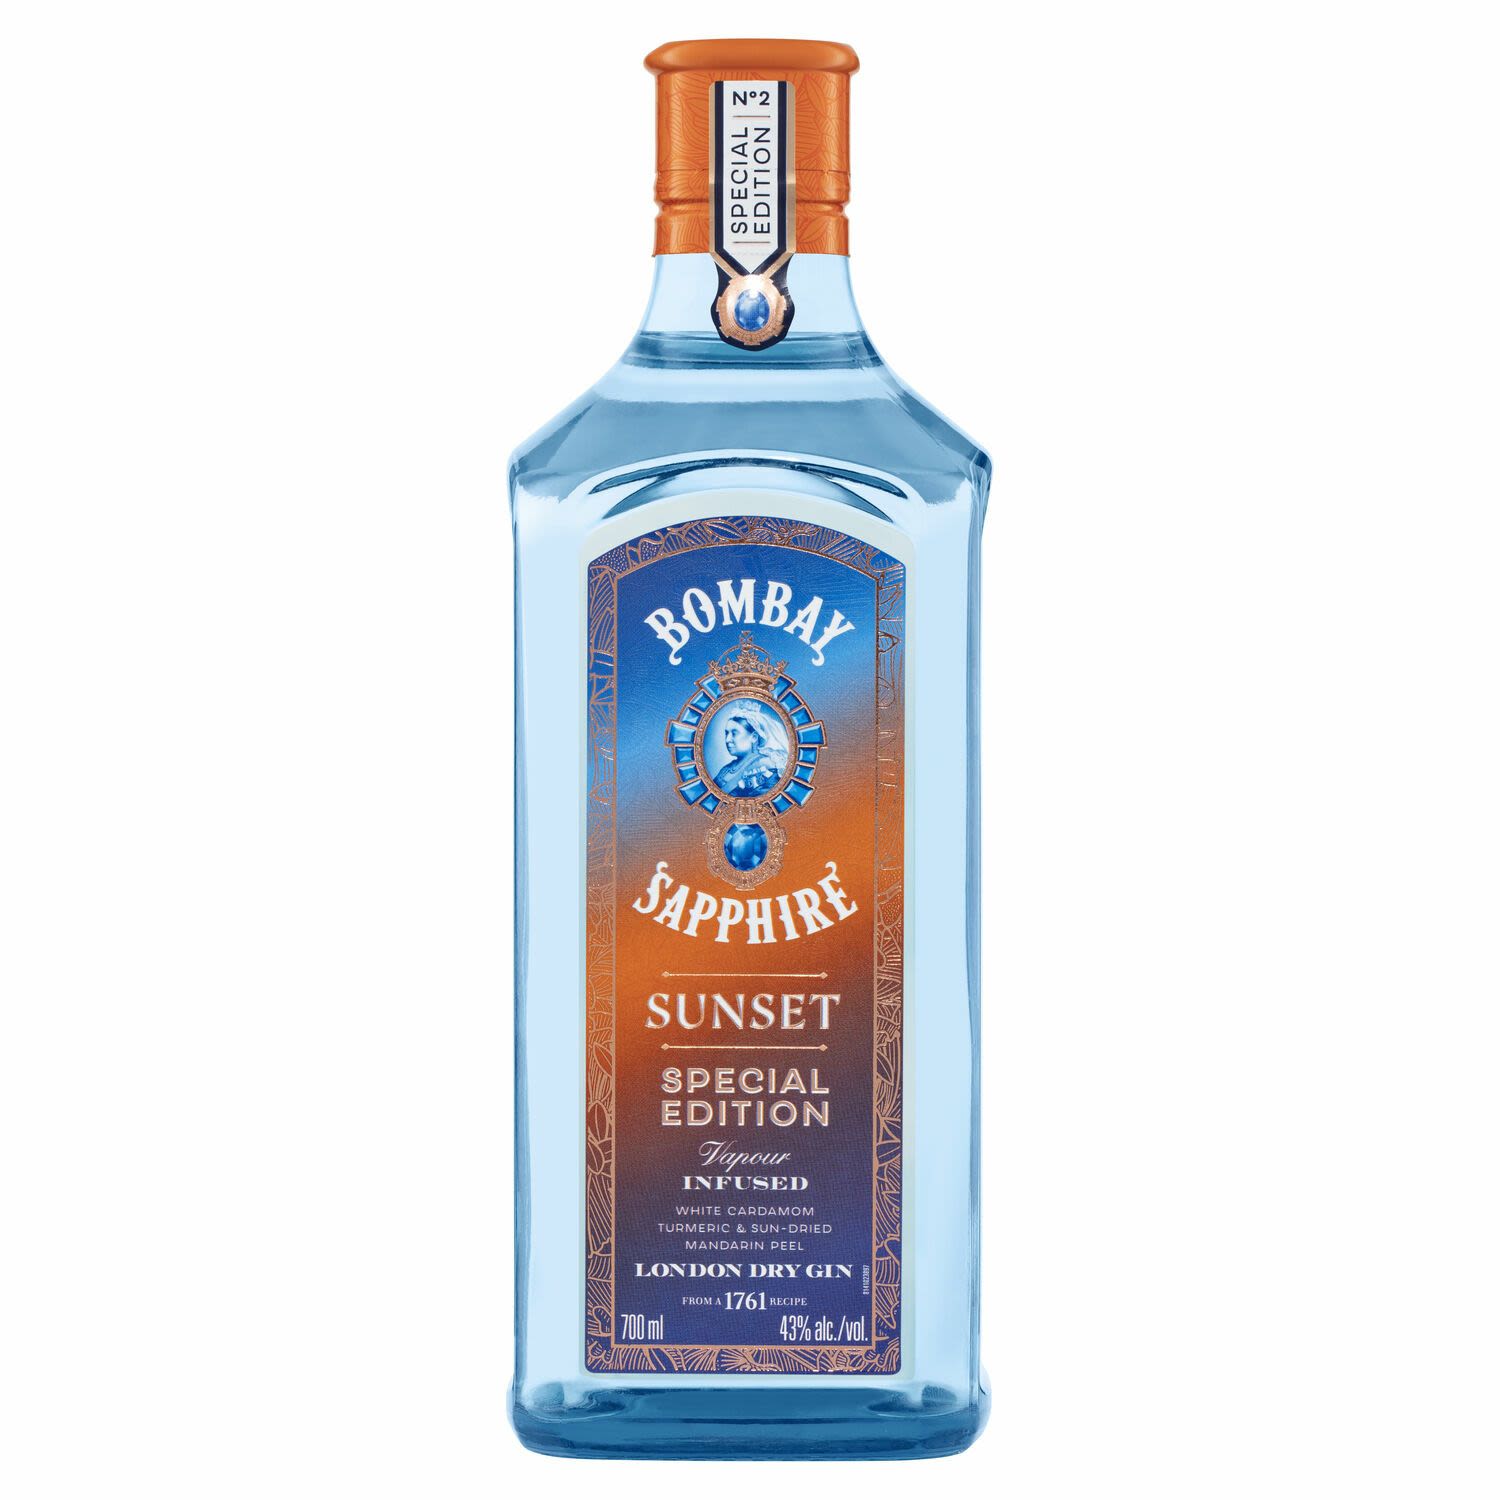 BOMBAY SAPPHIRE Sunset aromatic gin, beautifully balances the warming spices of Indian white cardamom and turmeric, together with bittersweet spanish sun-dried mandarin peel, to deliver sweet warming spice and fragrant citrus freshness.​ Perfect to serve in a 'Sunset and Tonic' or a 'Sunset Negroni'.<br /> <br />Alcohol Volume: 43.0%<br /><br />Pack Format: Bottle<br /><br />Standard Drinks: 24.0<br /><br />Pack Type: Bottle<br /><br />Country of Origin: England<br />